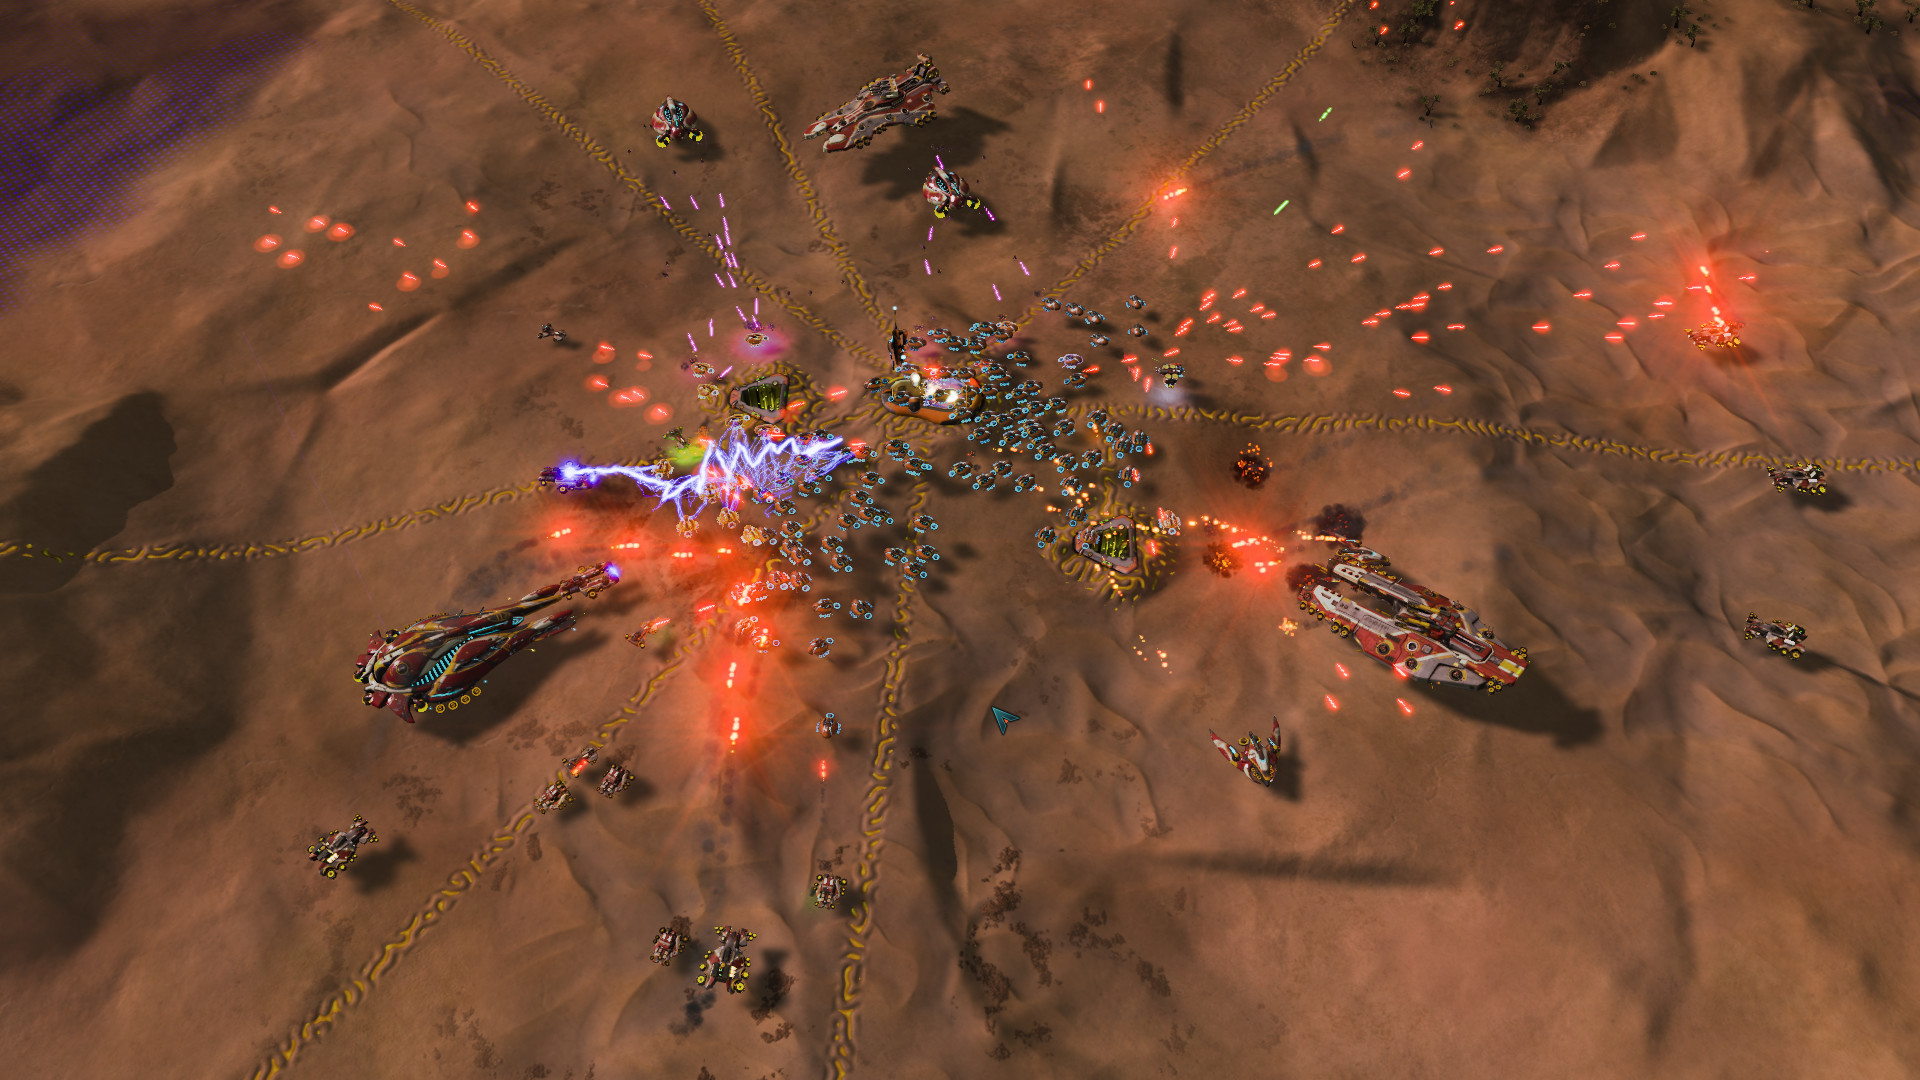 Ashes of the Singularity: Escalation - Overlord Scenario Pack DLC screenshot